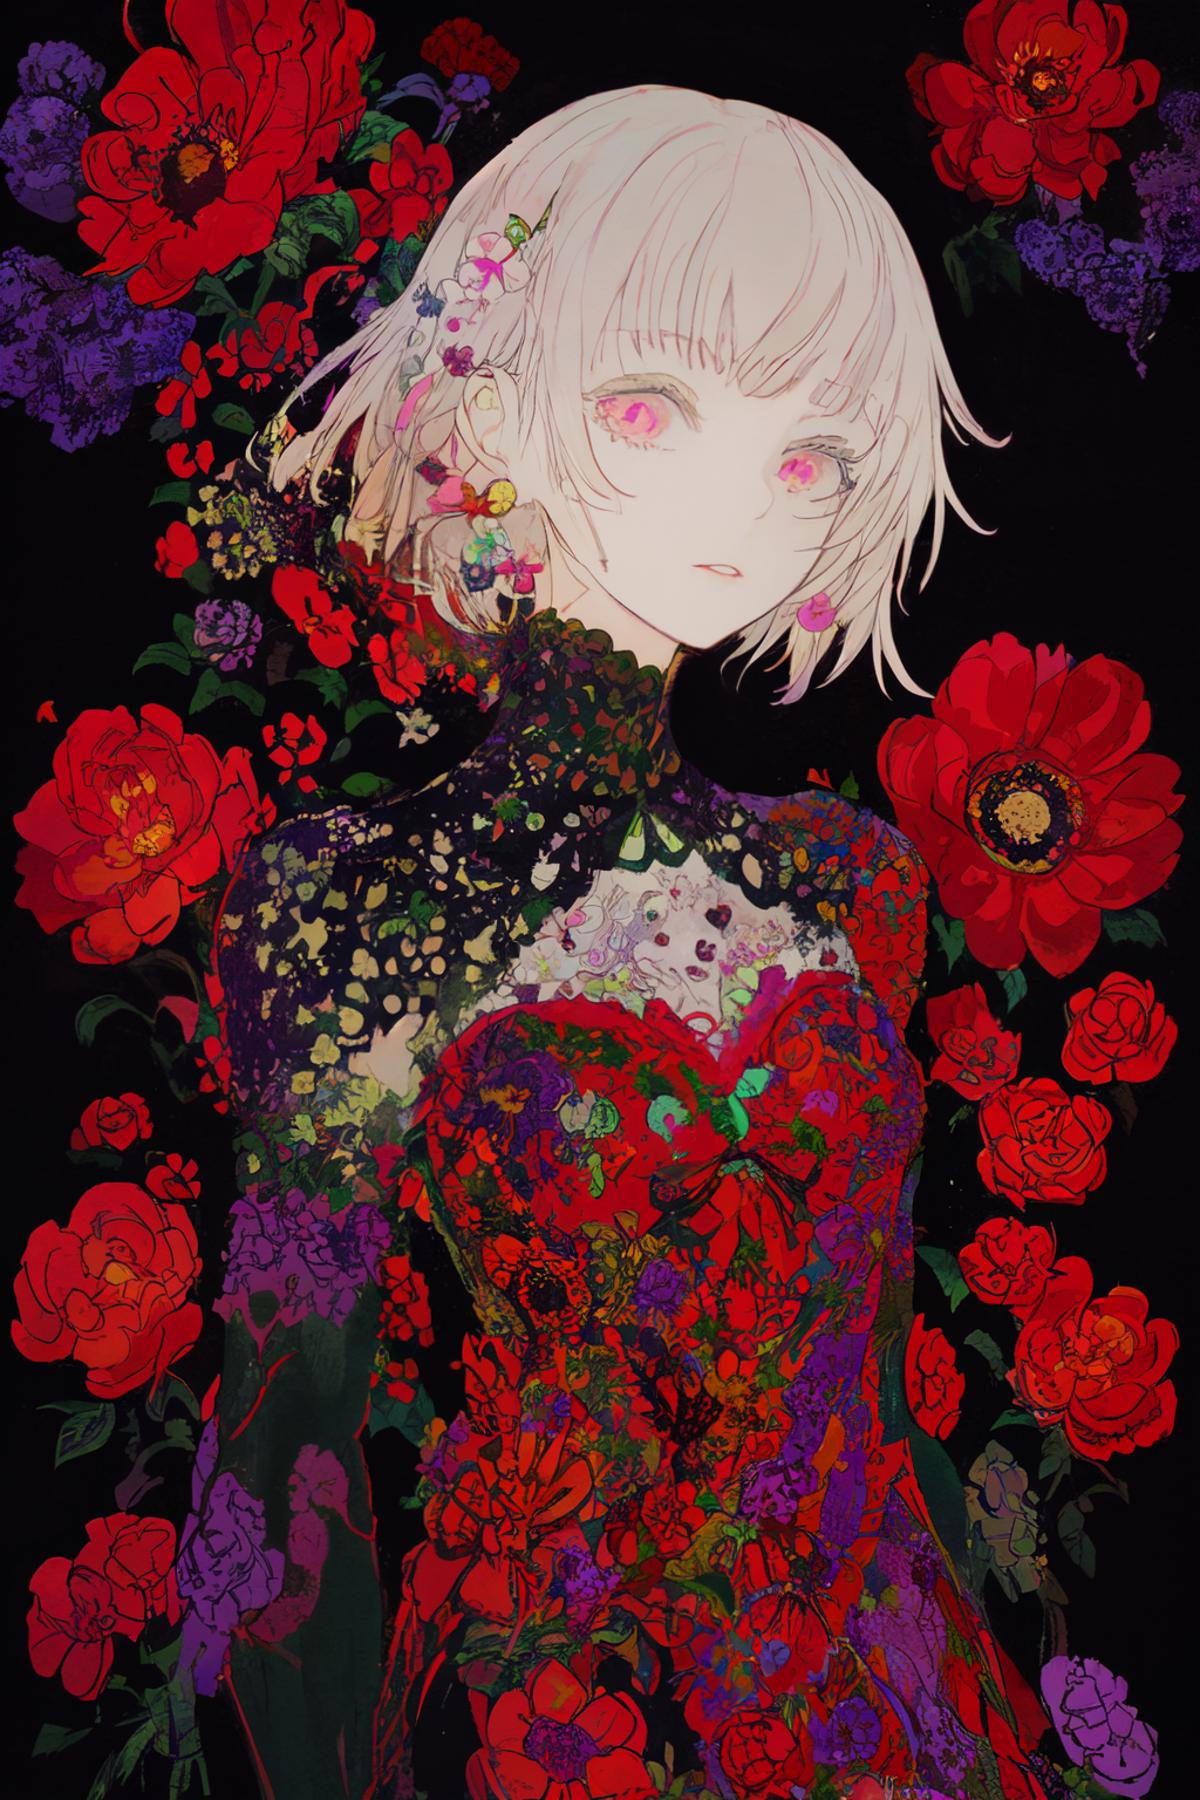 A beautifully illustrated woman with white hair and purple eyes is surrounded by red flowers in a black background.